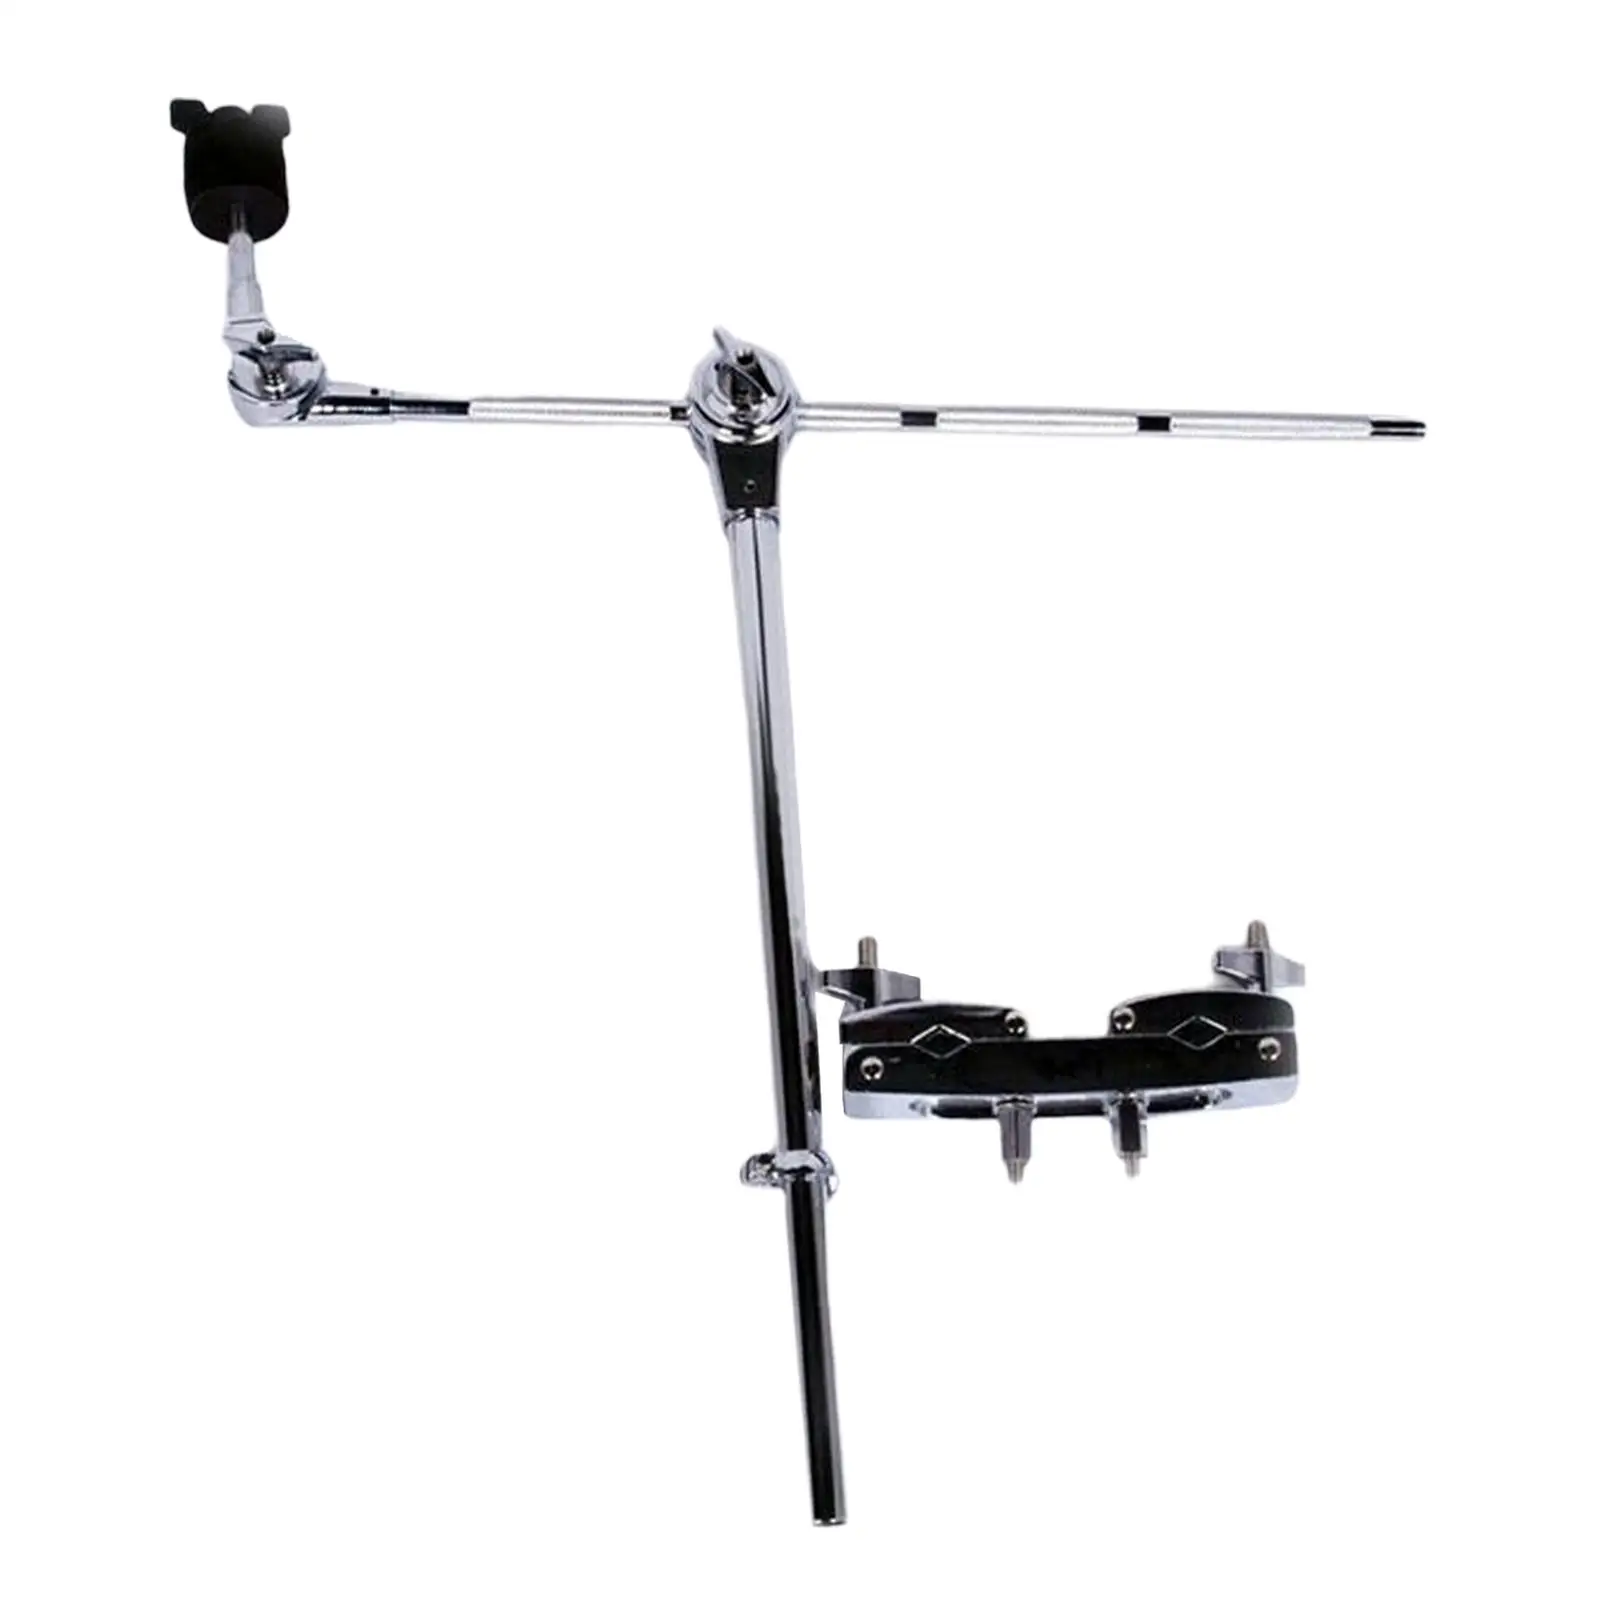 Connecting Clamp Hanging Cymbal Rack Metal Arm Stand Drum Stand Cymbal Clip for